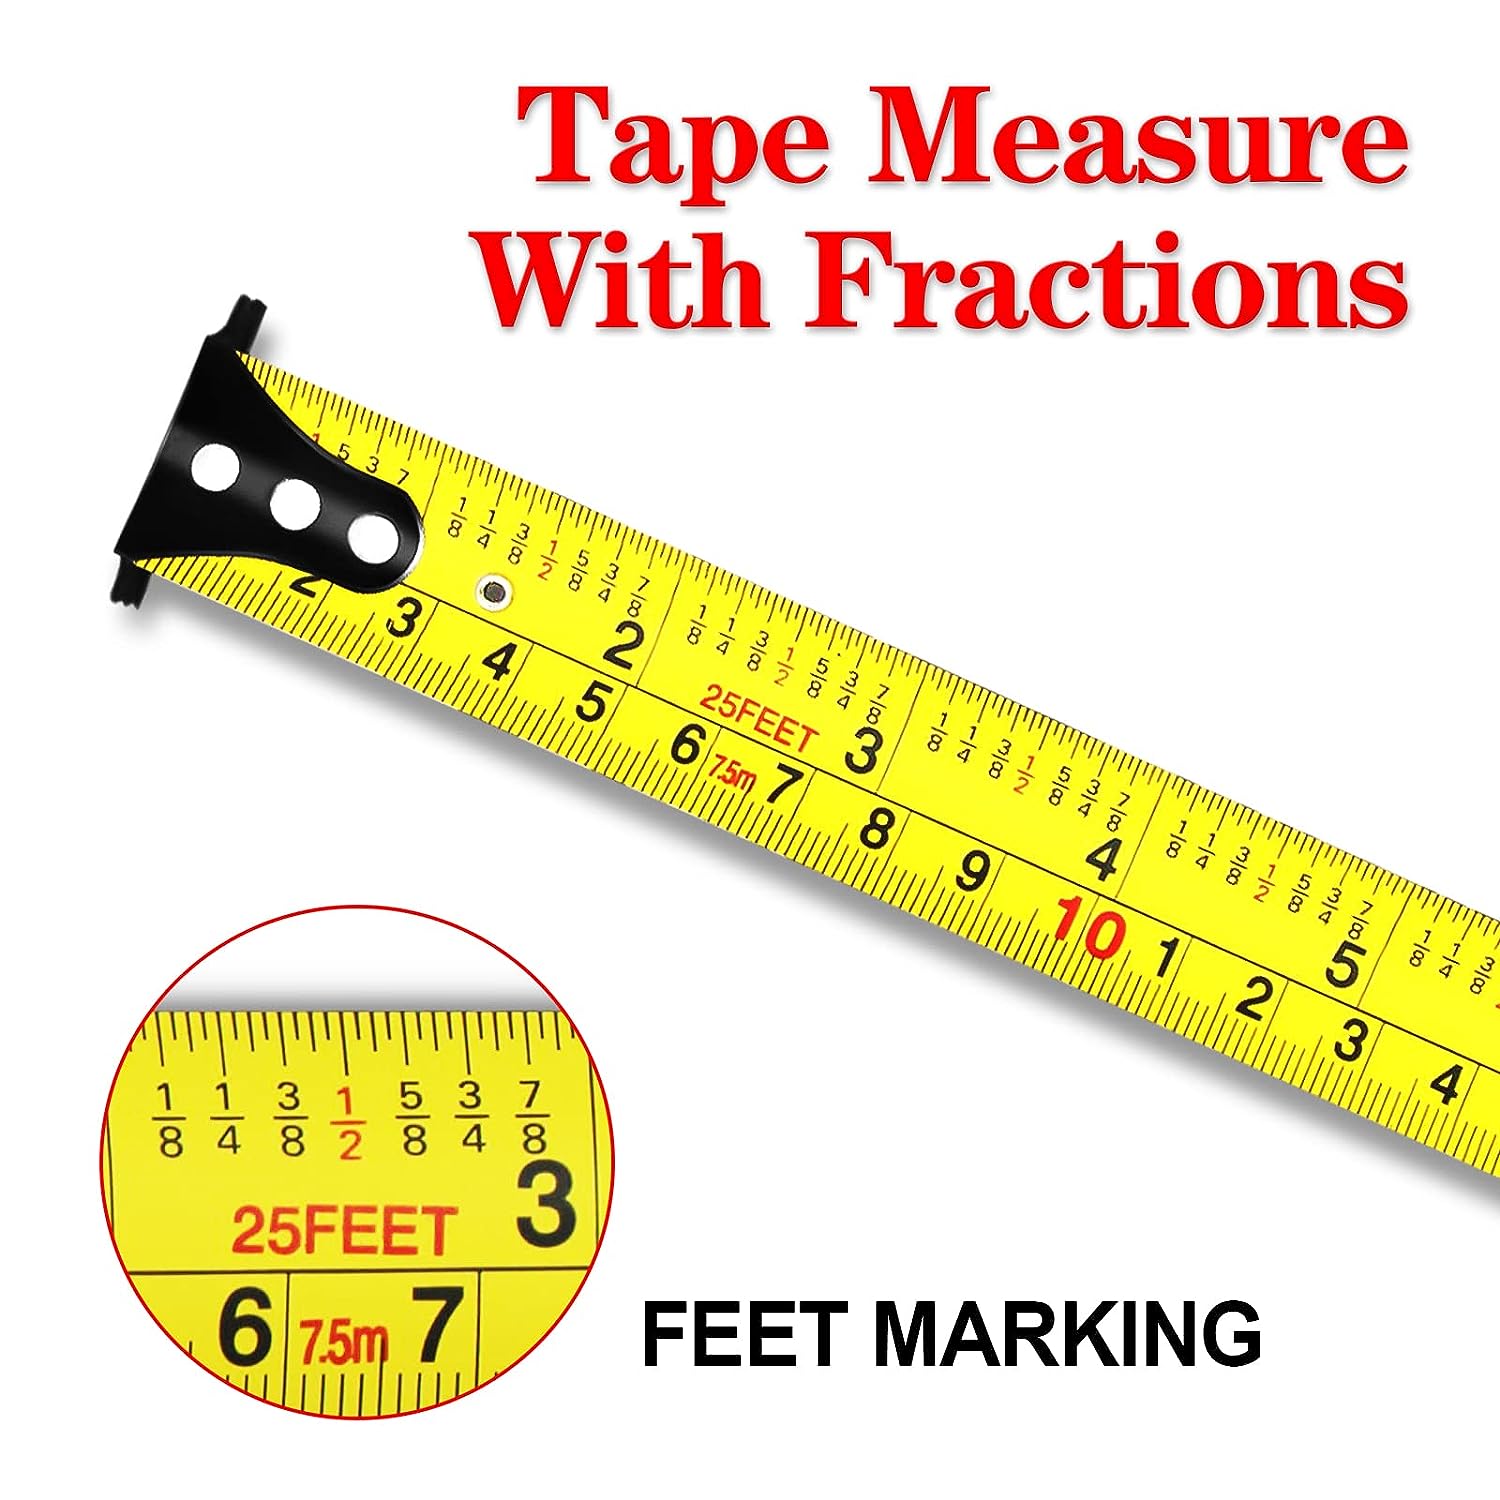 DURATECH Magnetic Tape Measure 25FT with Fractions 1/8, Retractable  Measuring Tape, Easy to Read Both Side Measurement Tape, Magnetic Hook and  Shock Absorbent Case for Construction, Carpenter 